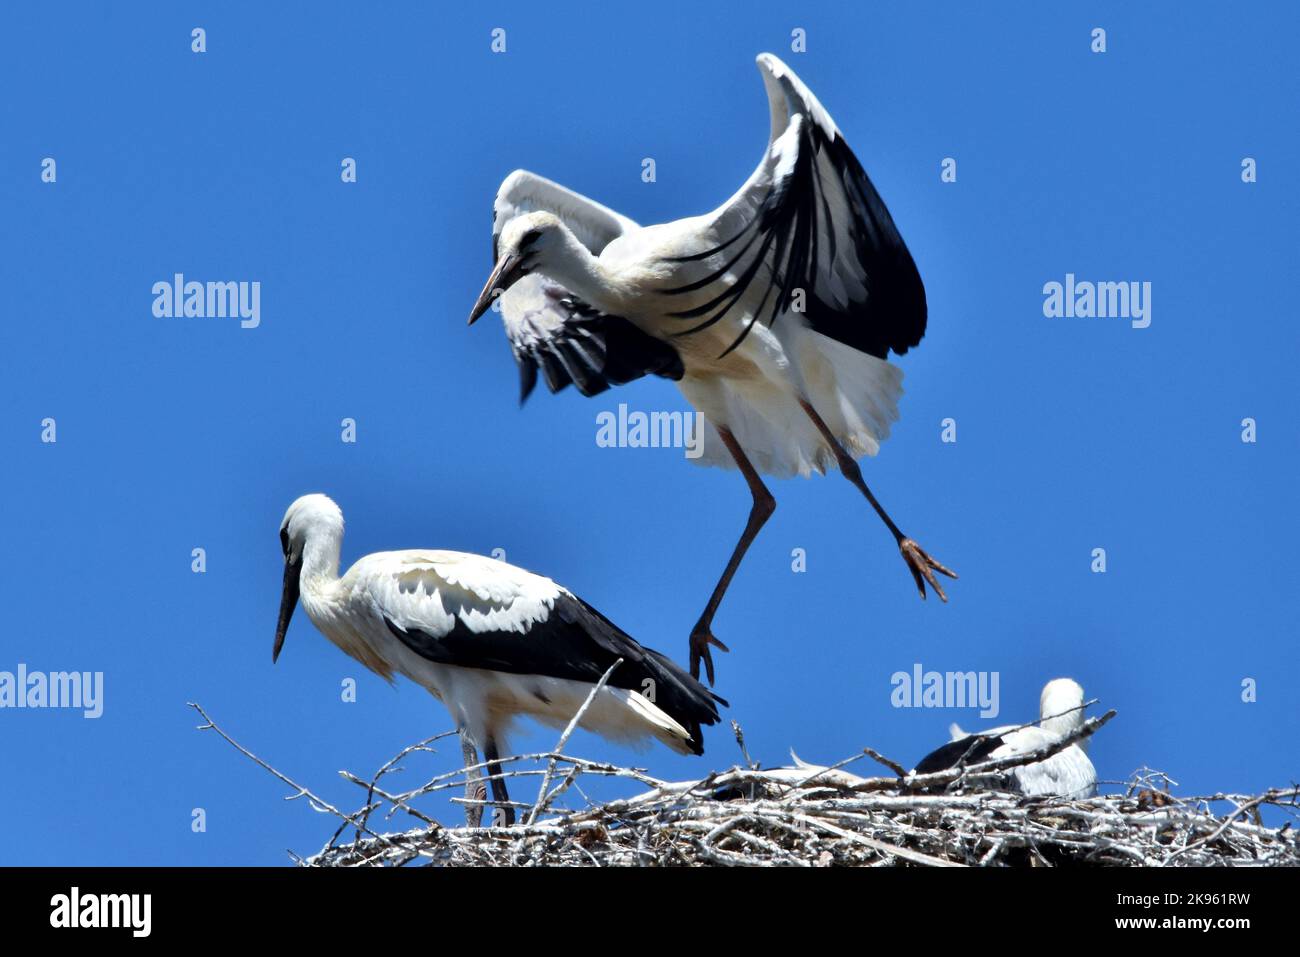 A view of storks perching on nest in background of sky Stock Photo